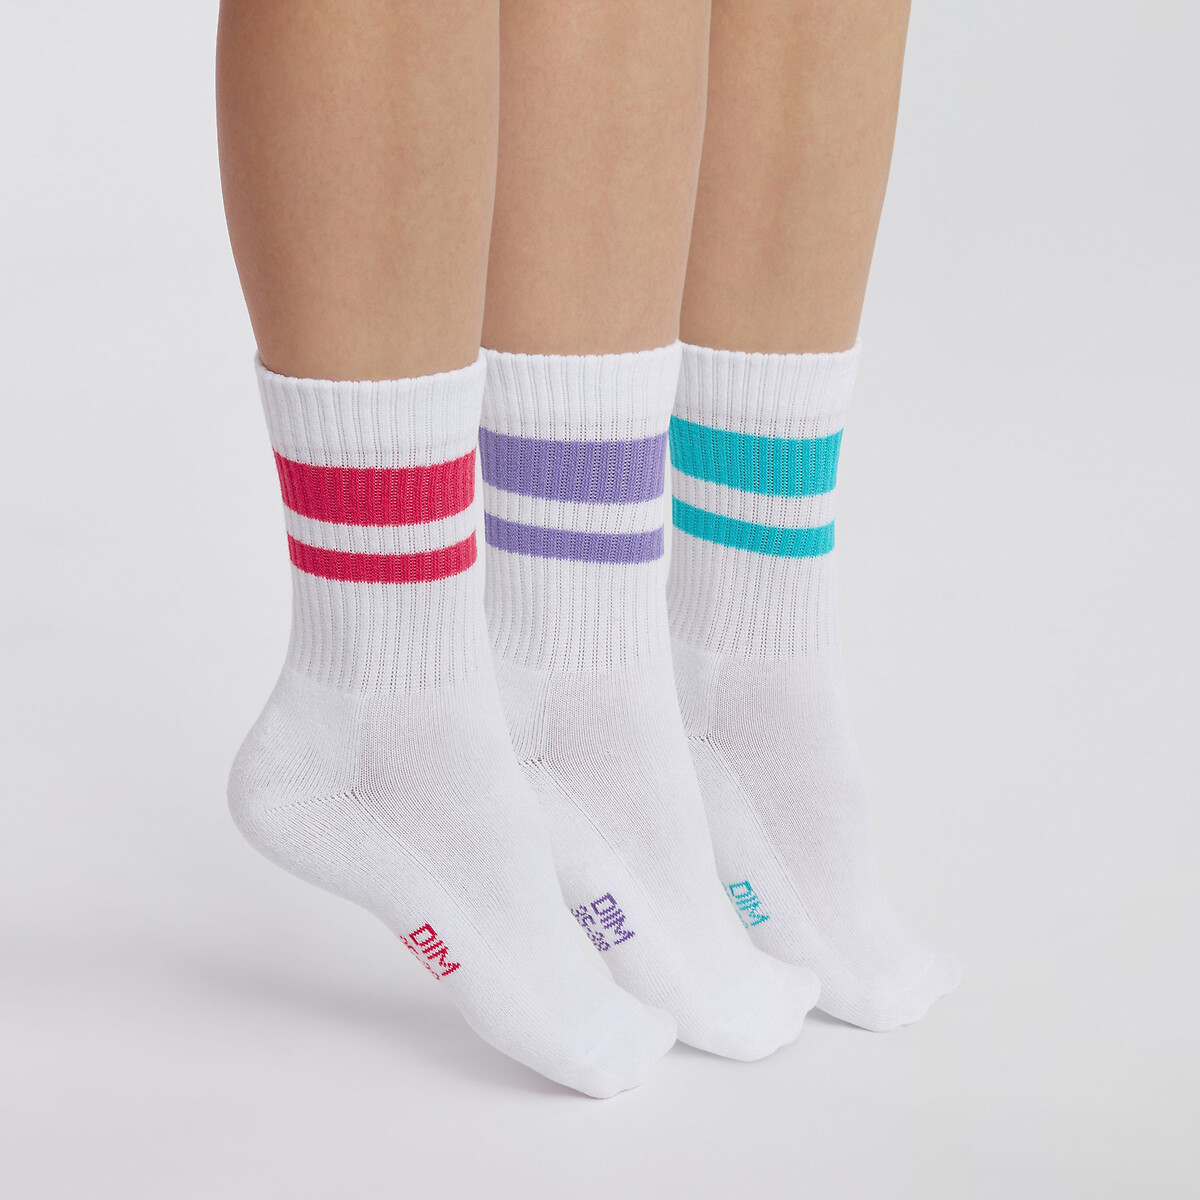 Pack of 3 Pairs of Ecodim Sports Socks in Cotton Mix